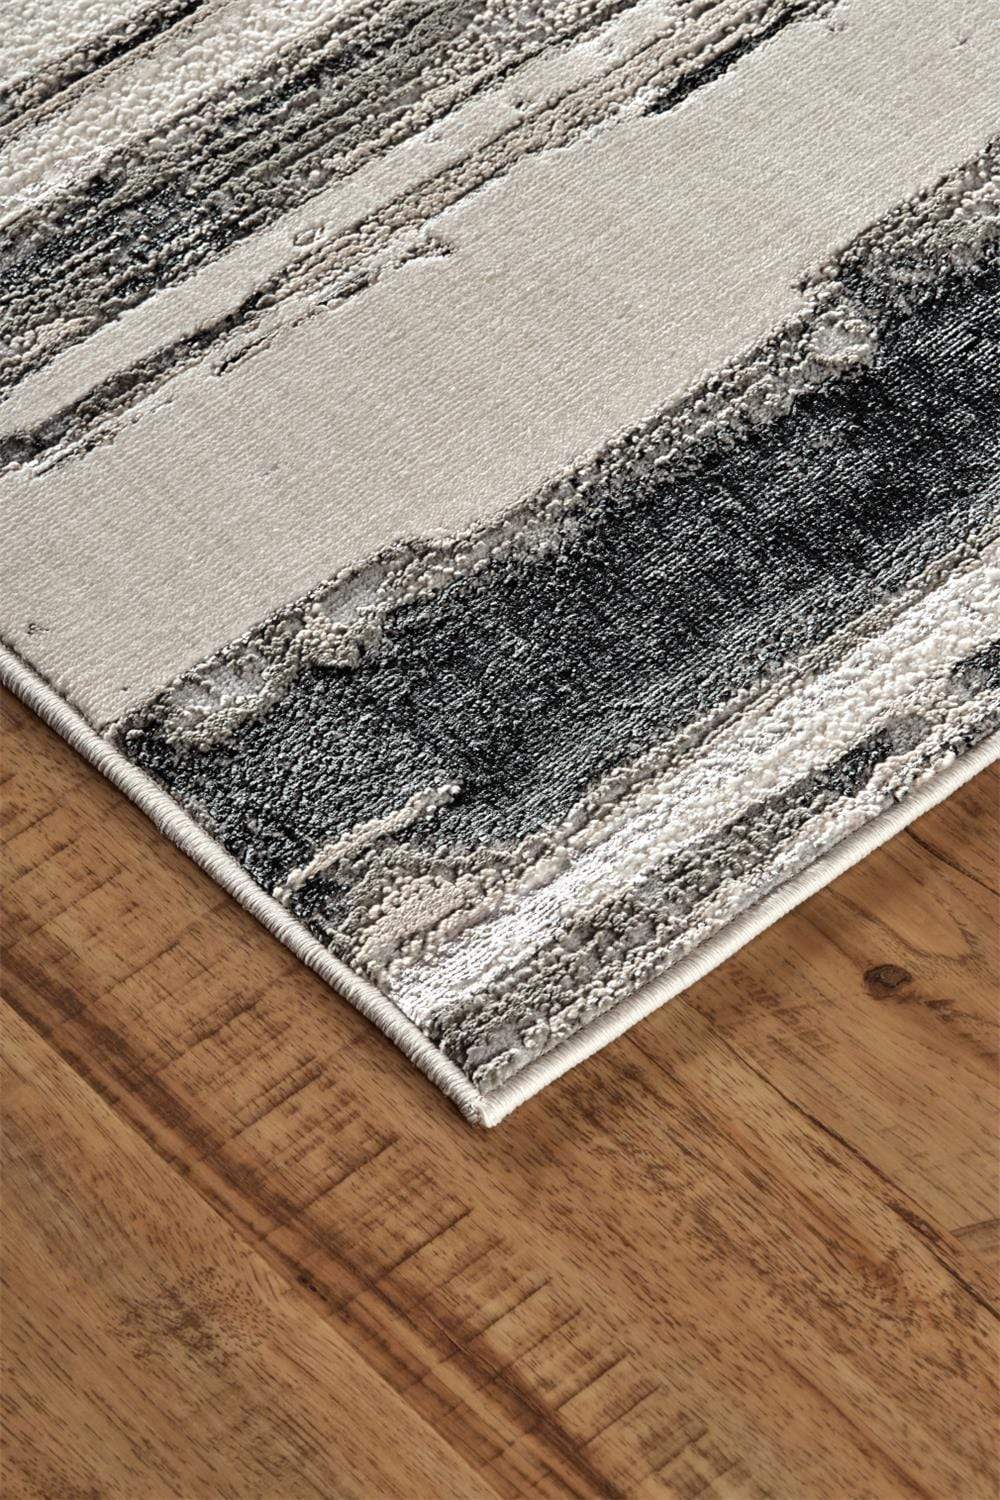 Feizy Feizy Micah Modern Metallic Gradient Rug - Available in 7 Sizes - Silver & Black